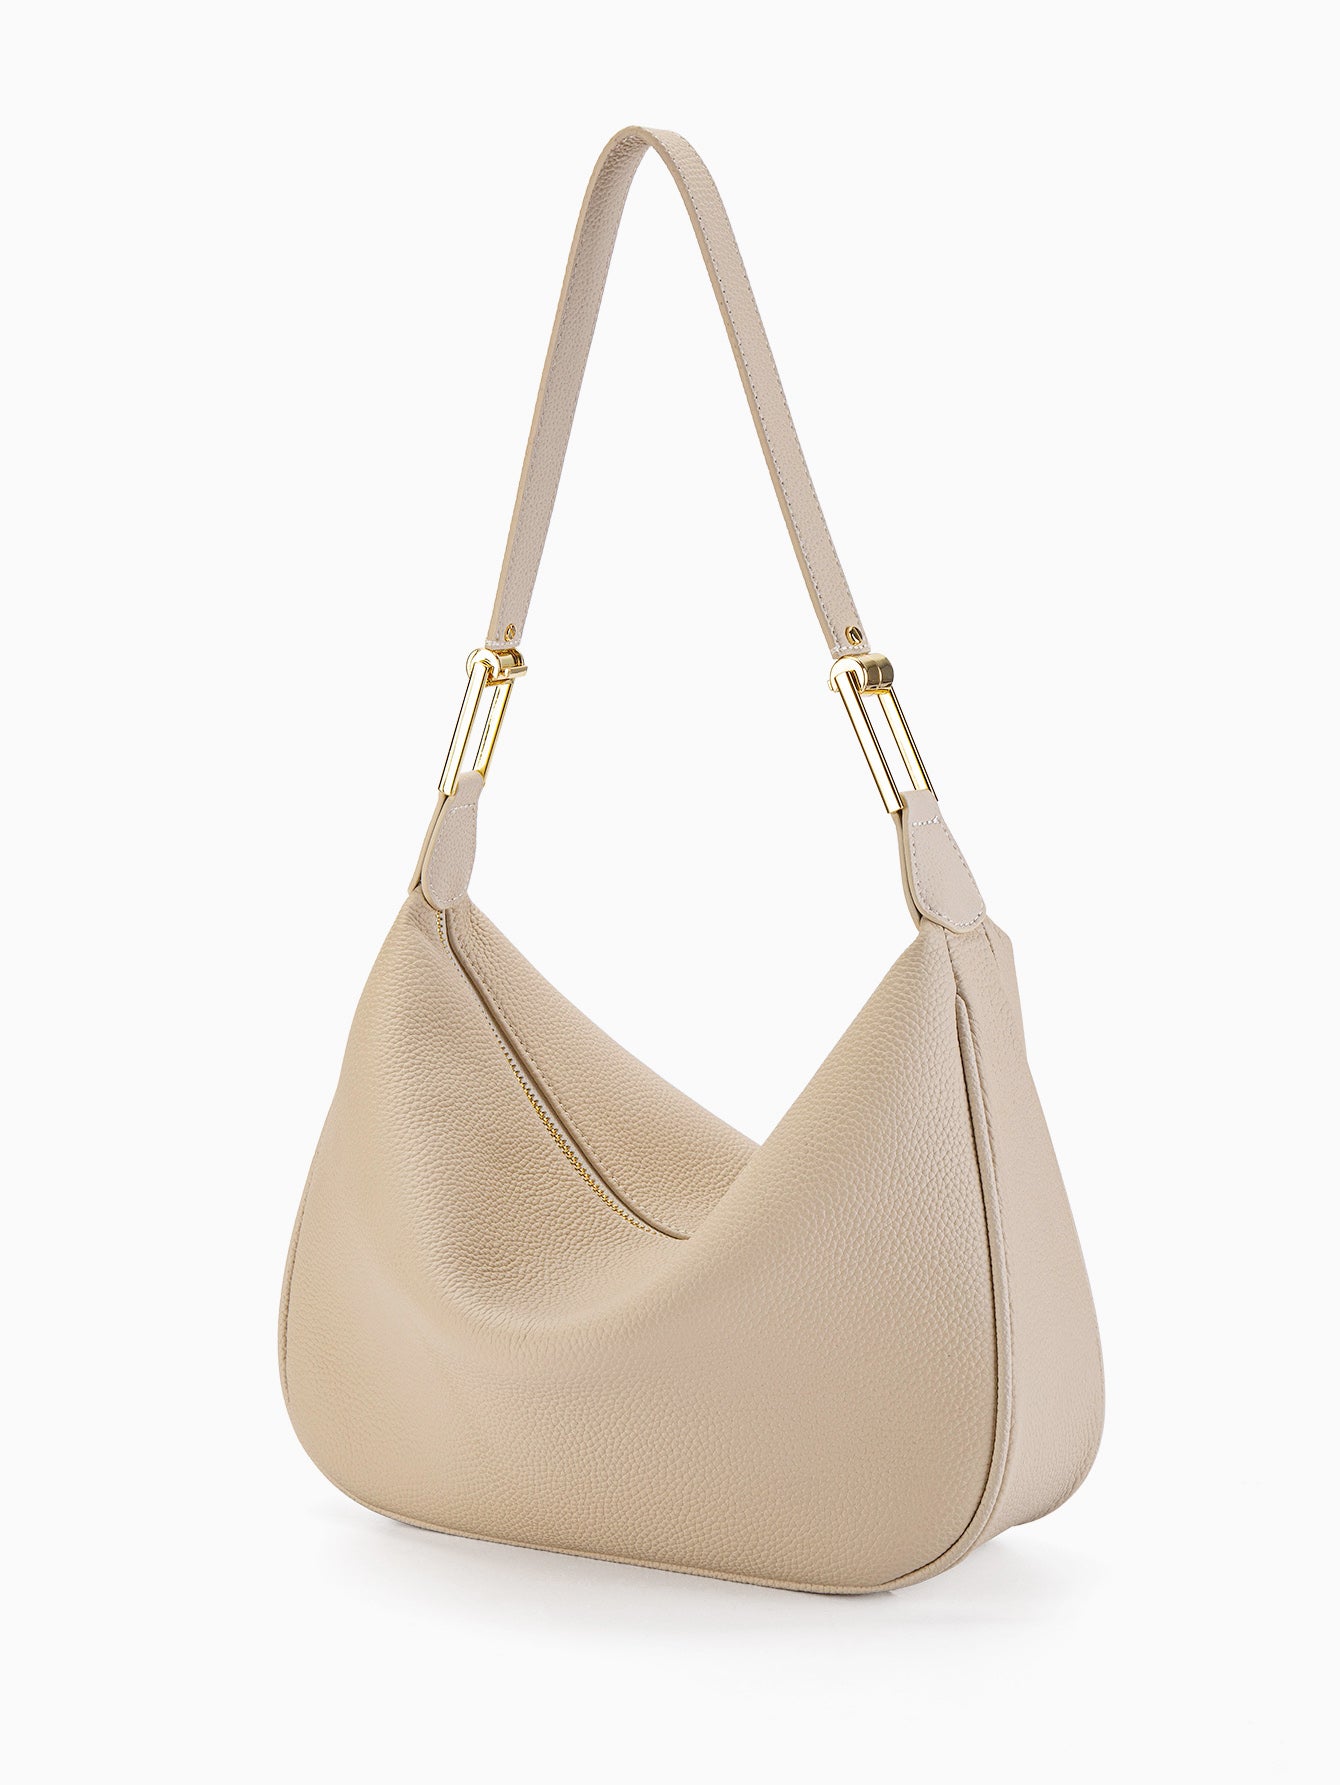 Beige Every Day Carry Women's Shoulder Bag